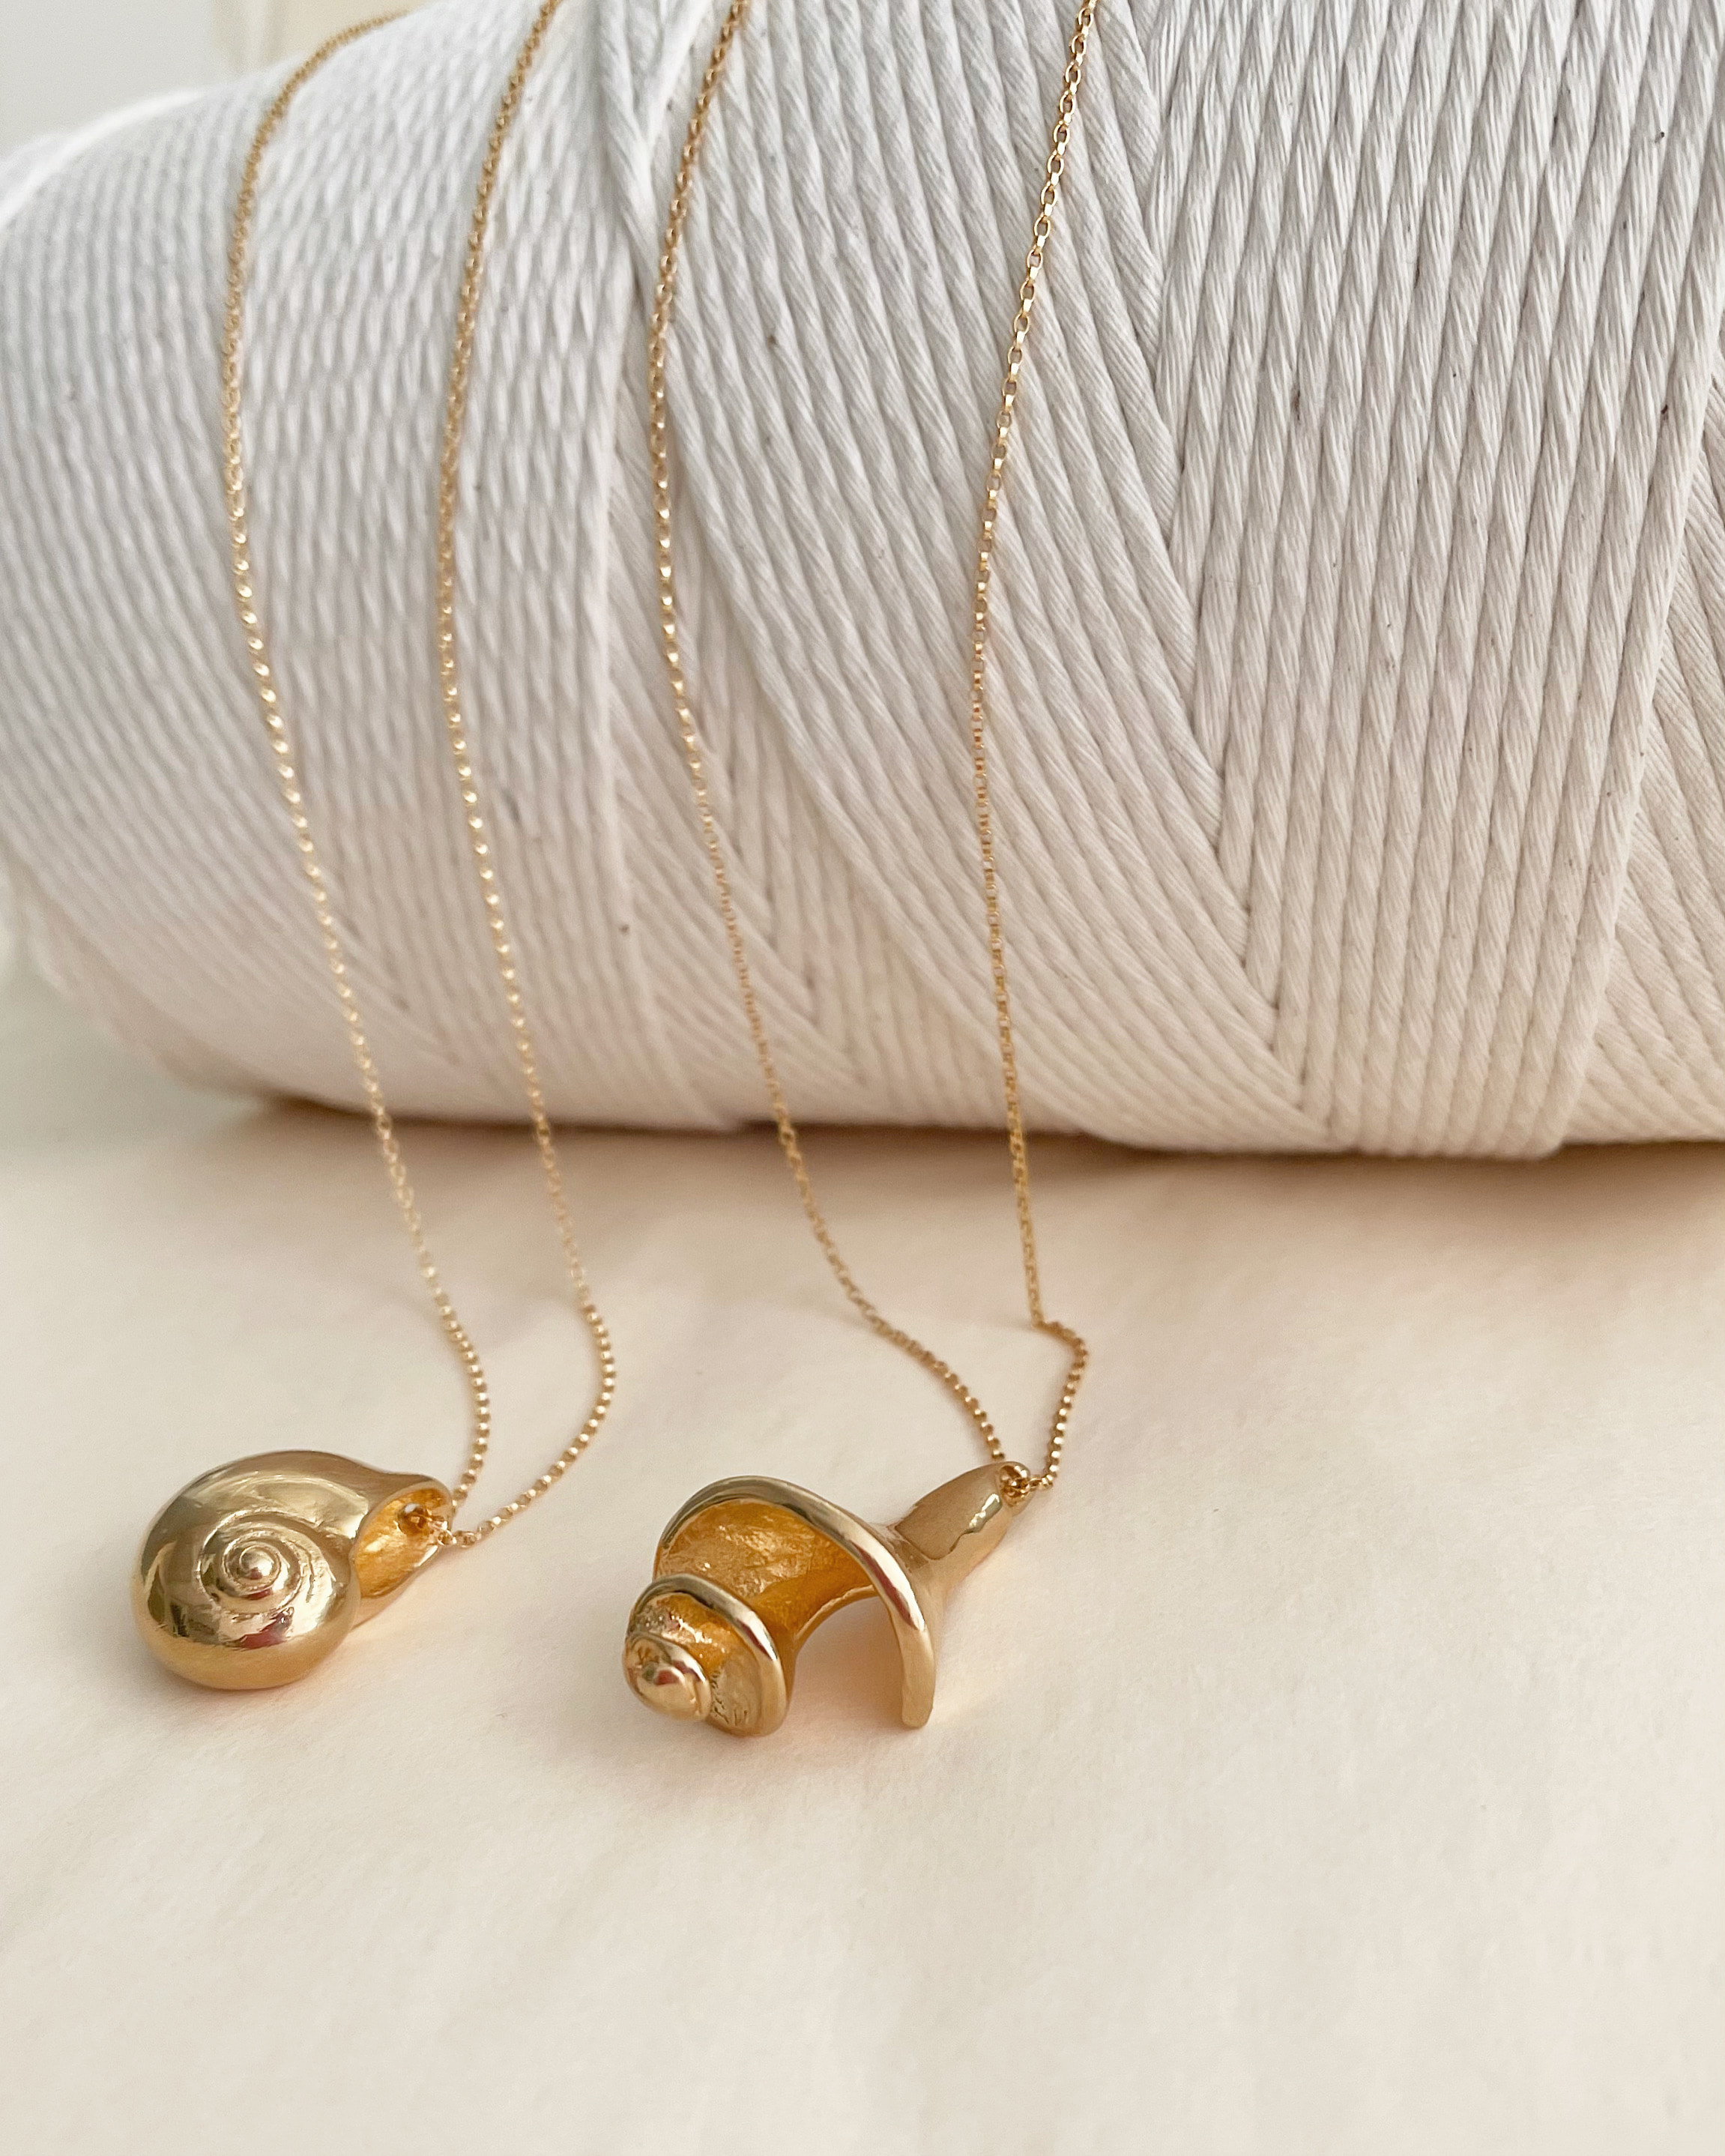 Buy Snail Pendant for Necklace, Shell Jewelry, Spiral Jewelry, Snail Jewelry,  Gold Snail, Silver Snail, Rose Gold Snail, Gift for Teacher Online in India  - Etsy